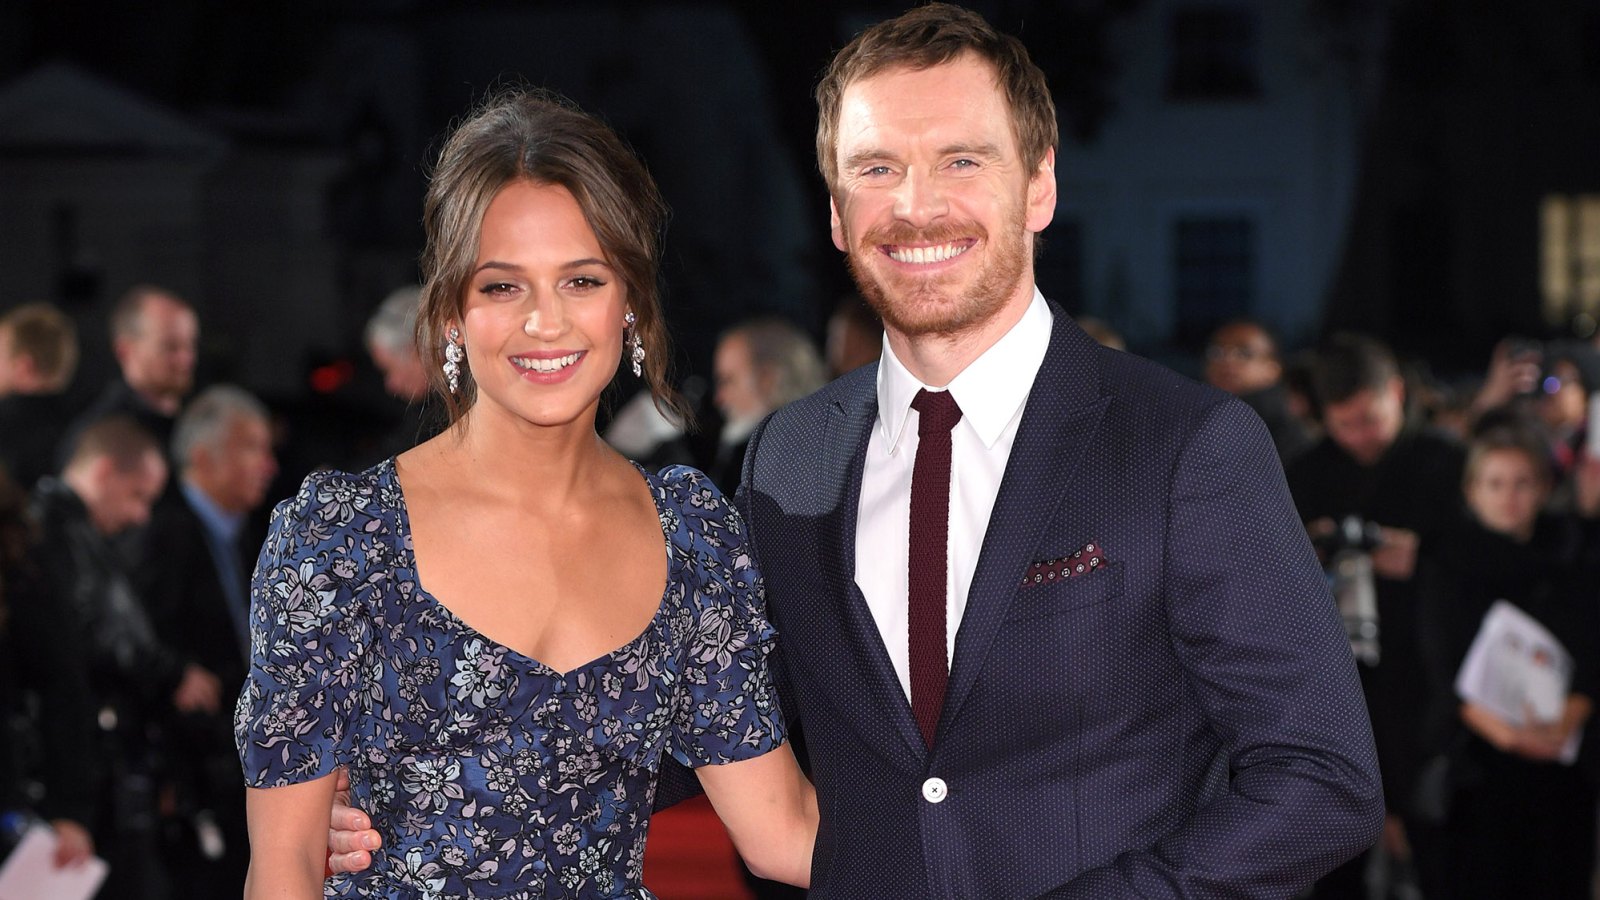 Michael Fassbender and Alicia Vikander Are Married!